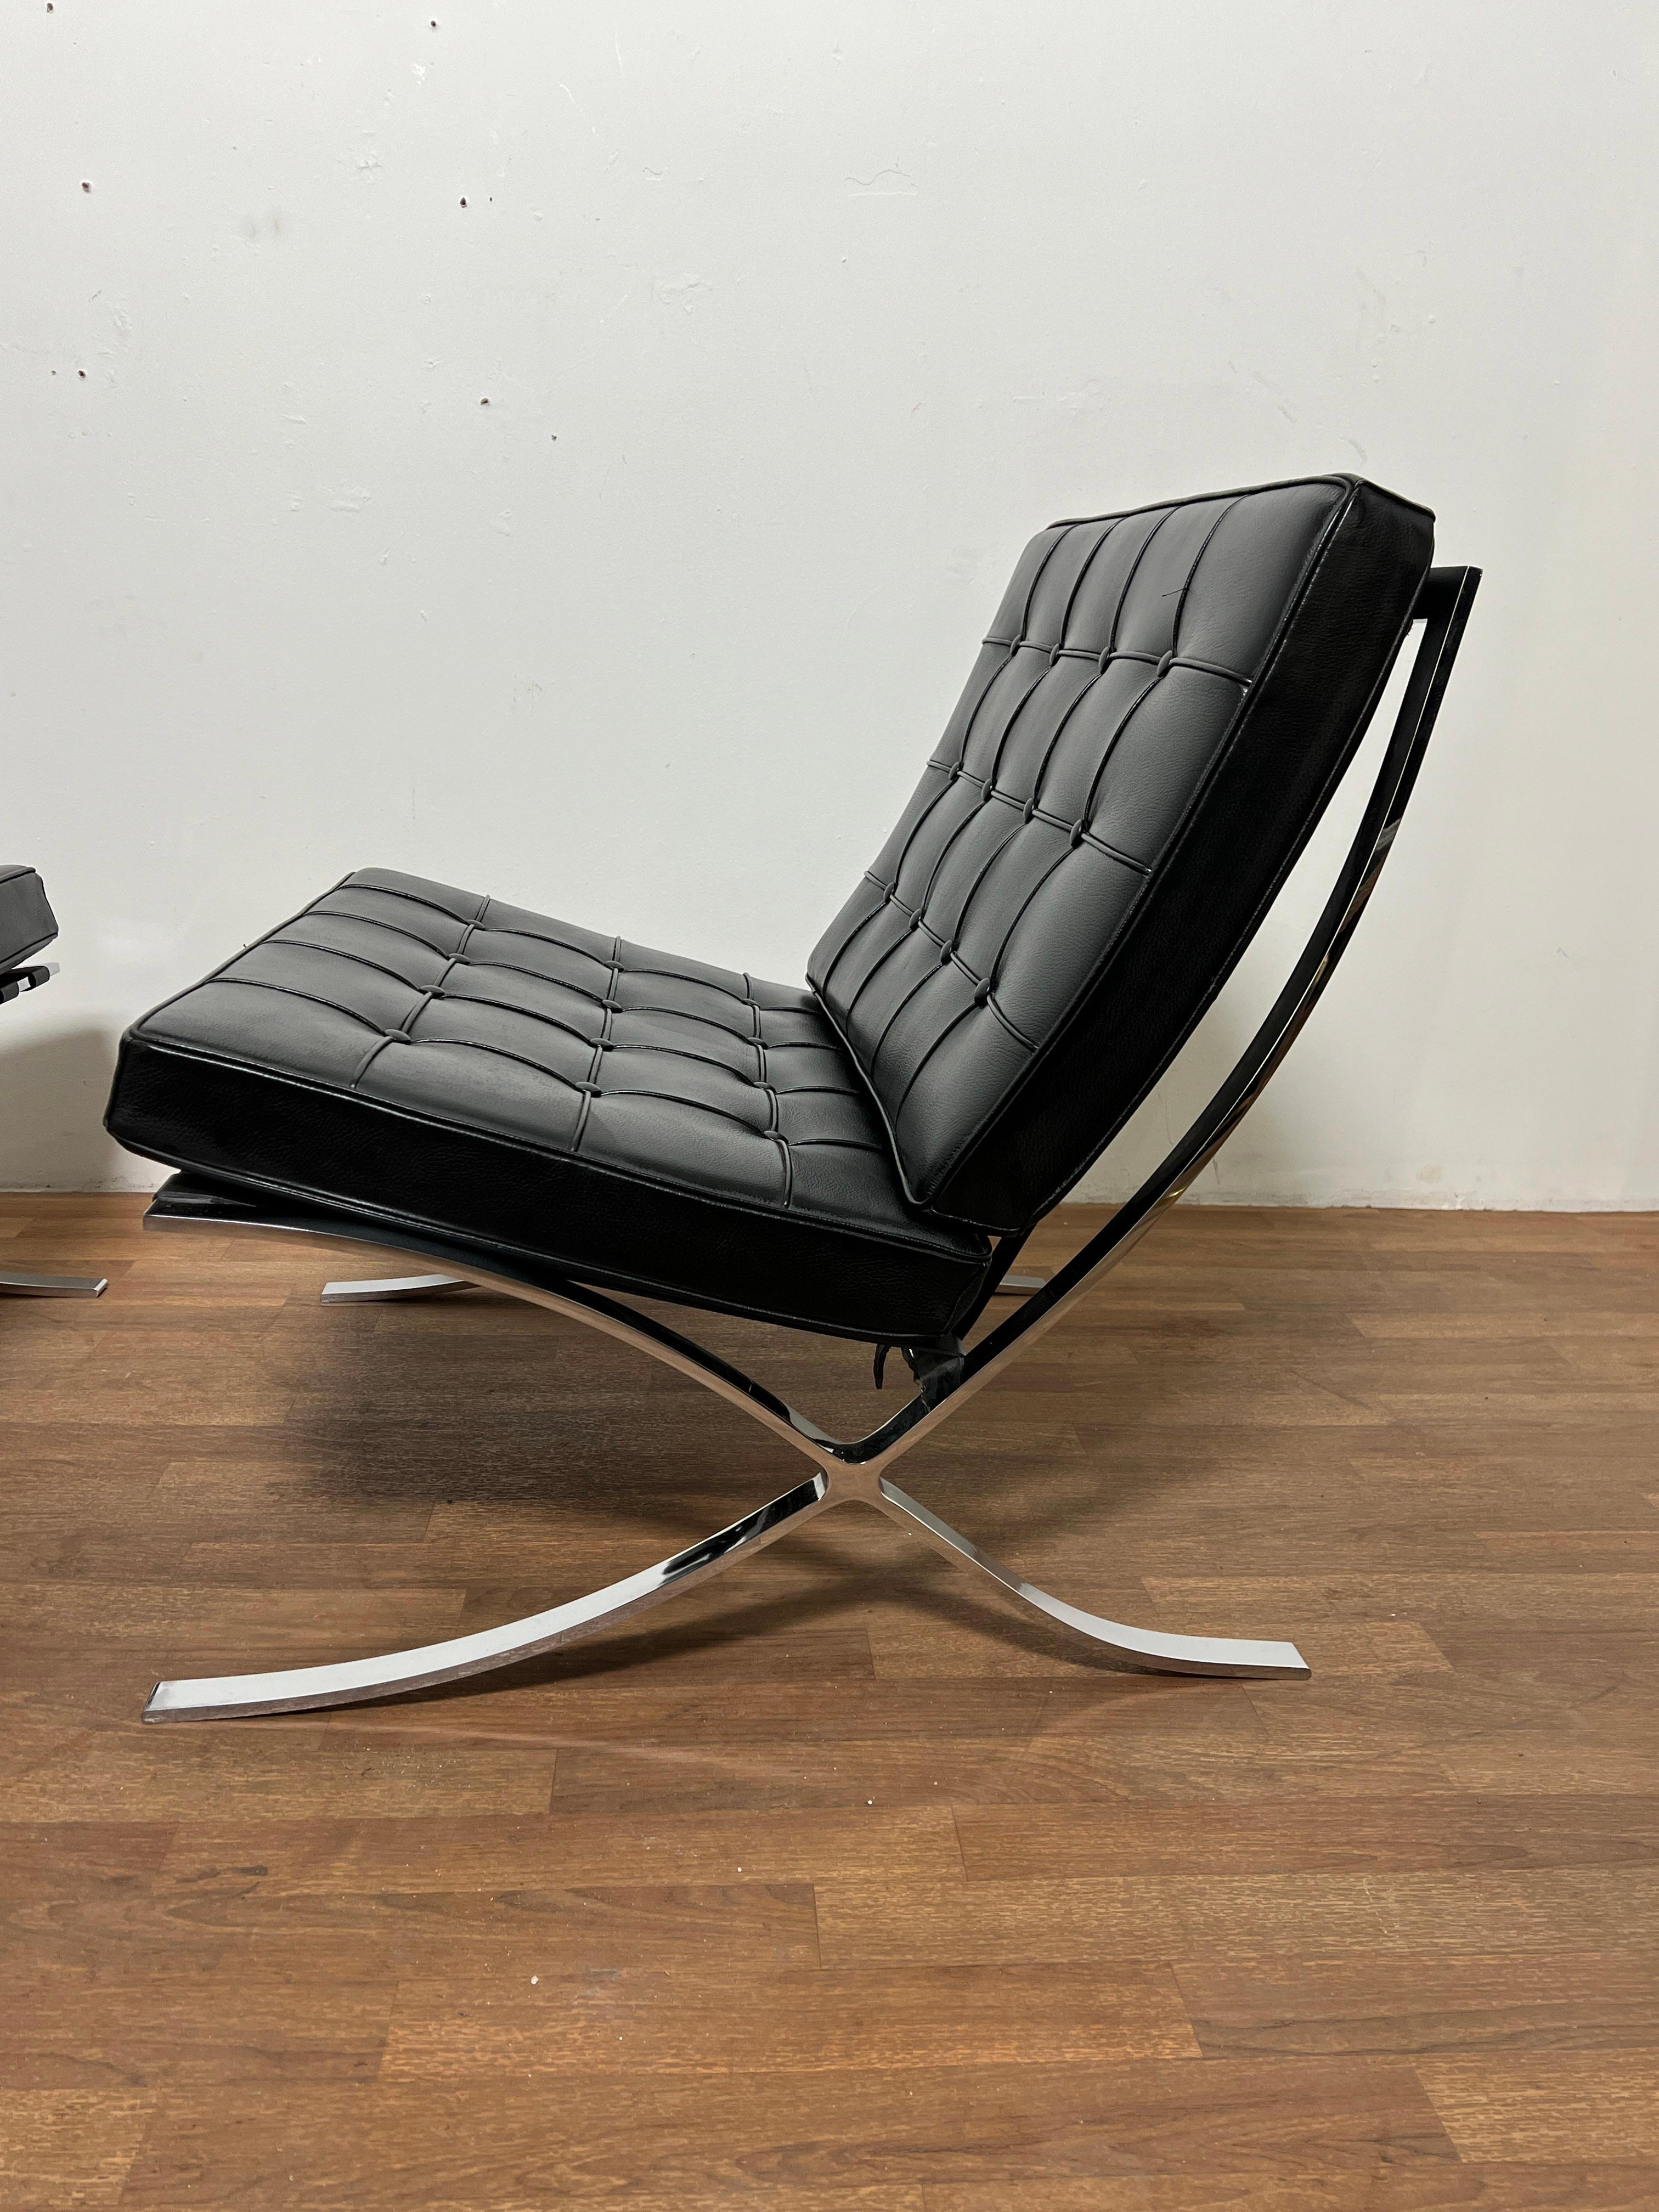 Bauhaus Pair of Italian Barcelona Leather Lounge Chairs by Gordon International C. 1990s For Sale